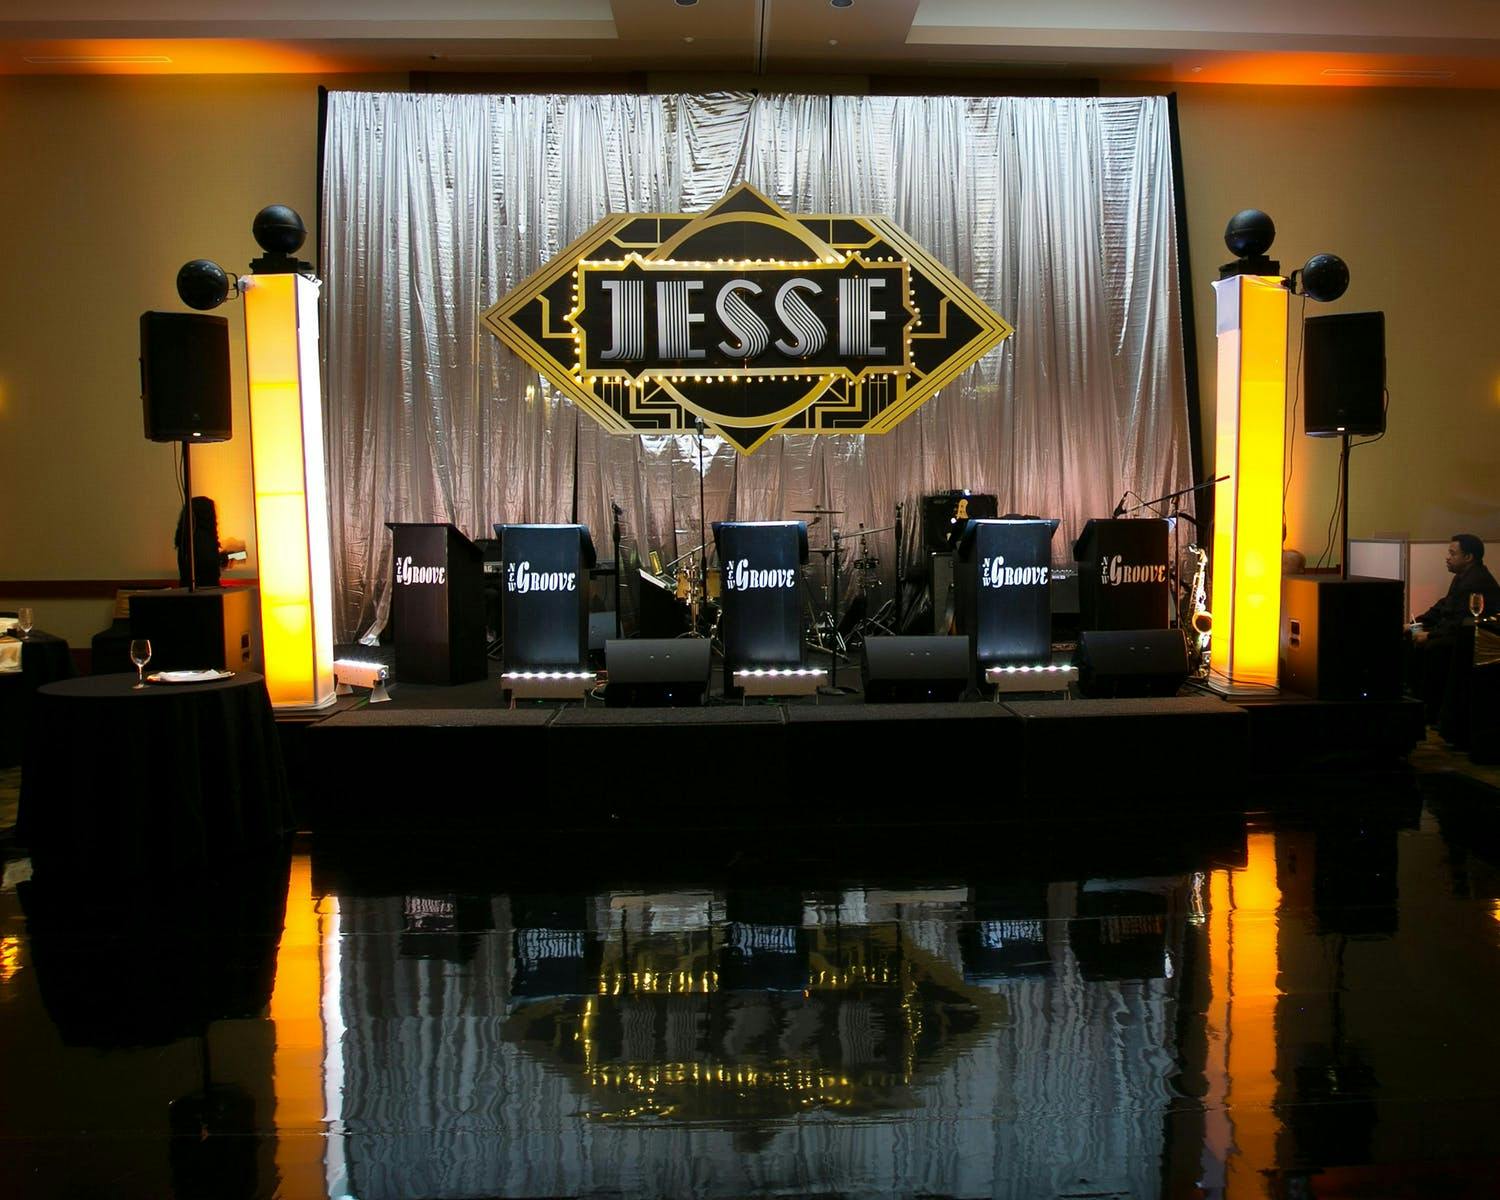 Art Deco Bar Mitzvah Band Stage With Personalized Signage That Reads 